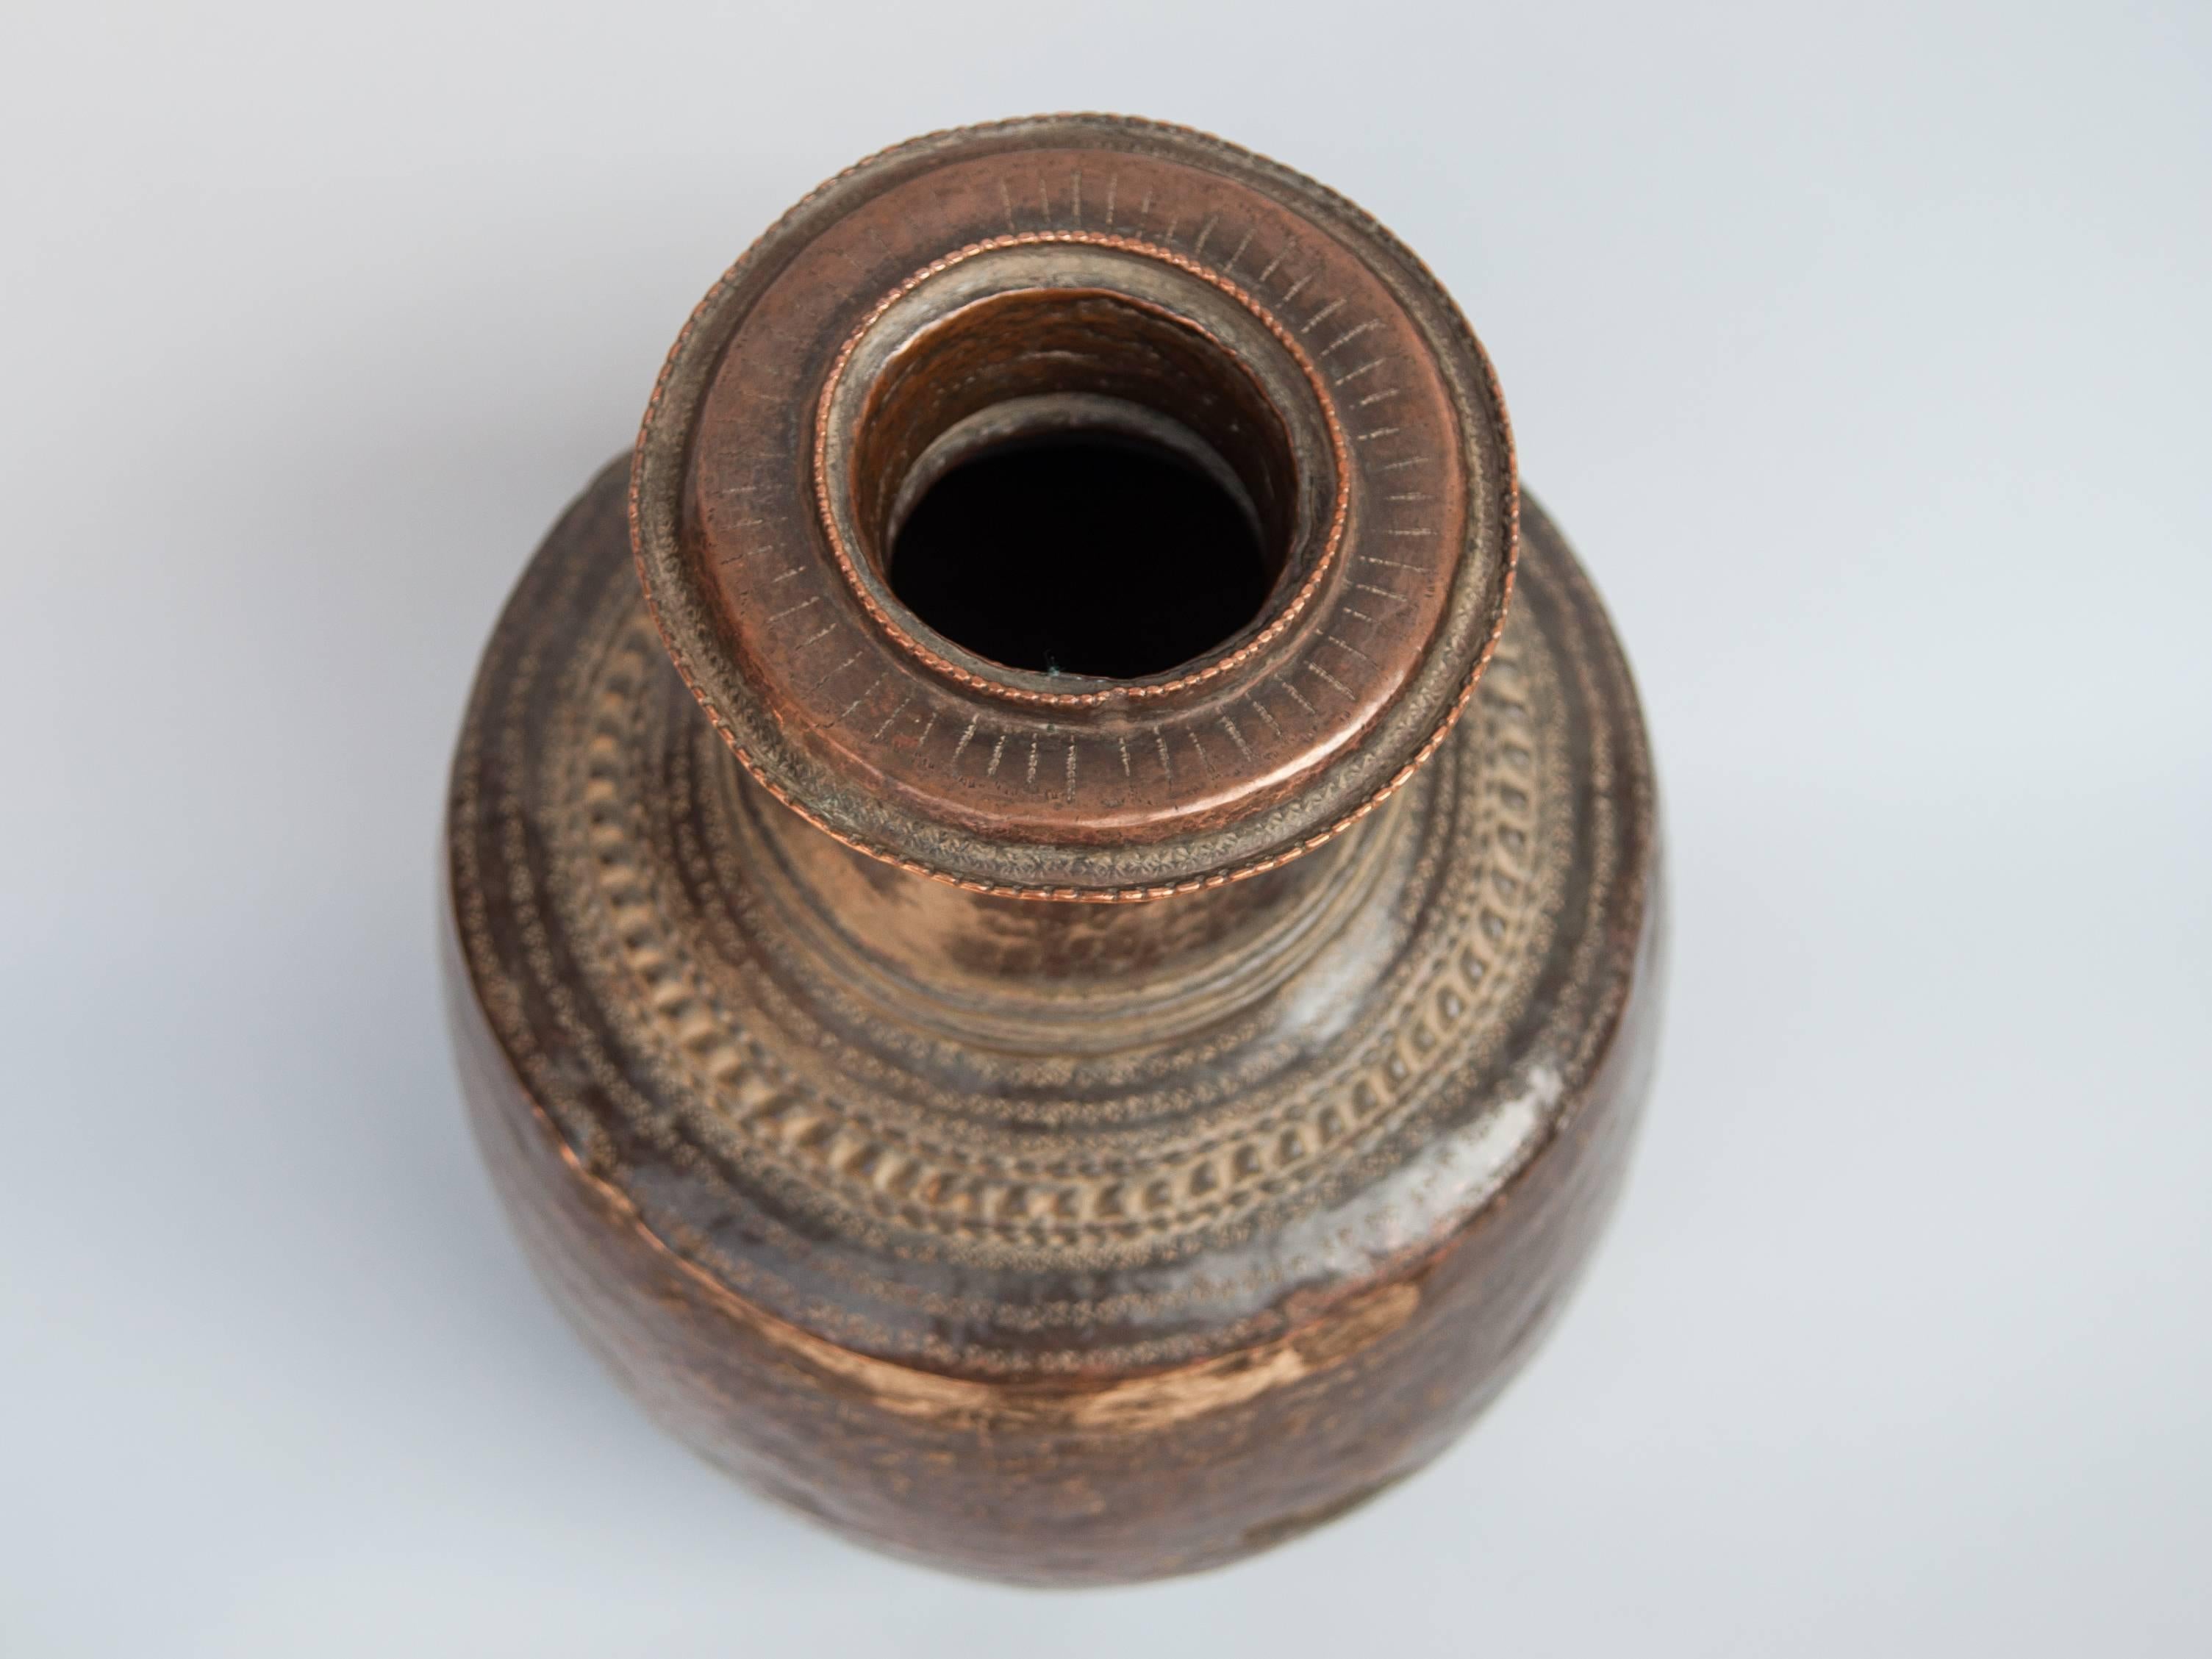 Nepalese Vintage Copper Water Pot from Nepal, Mid-20th Century